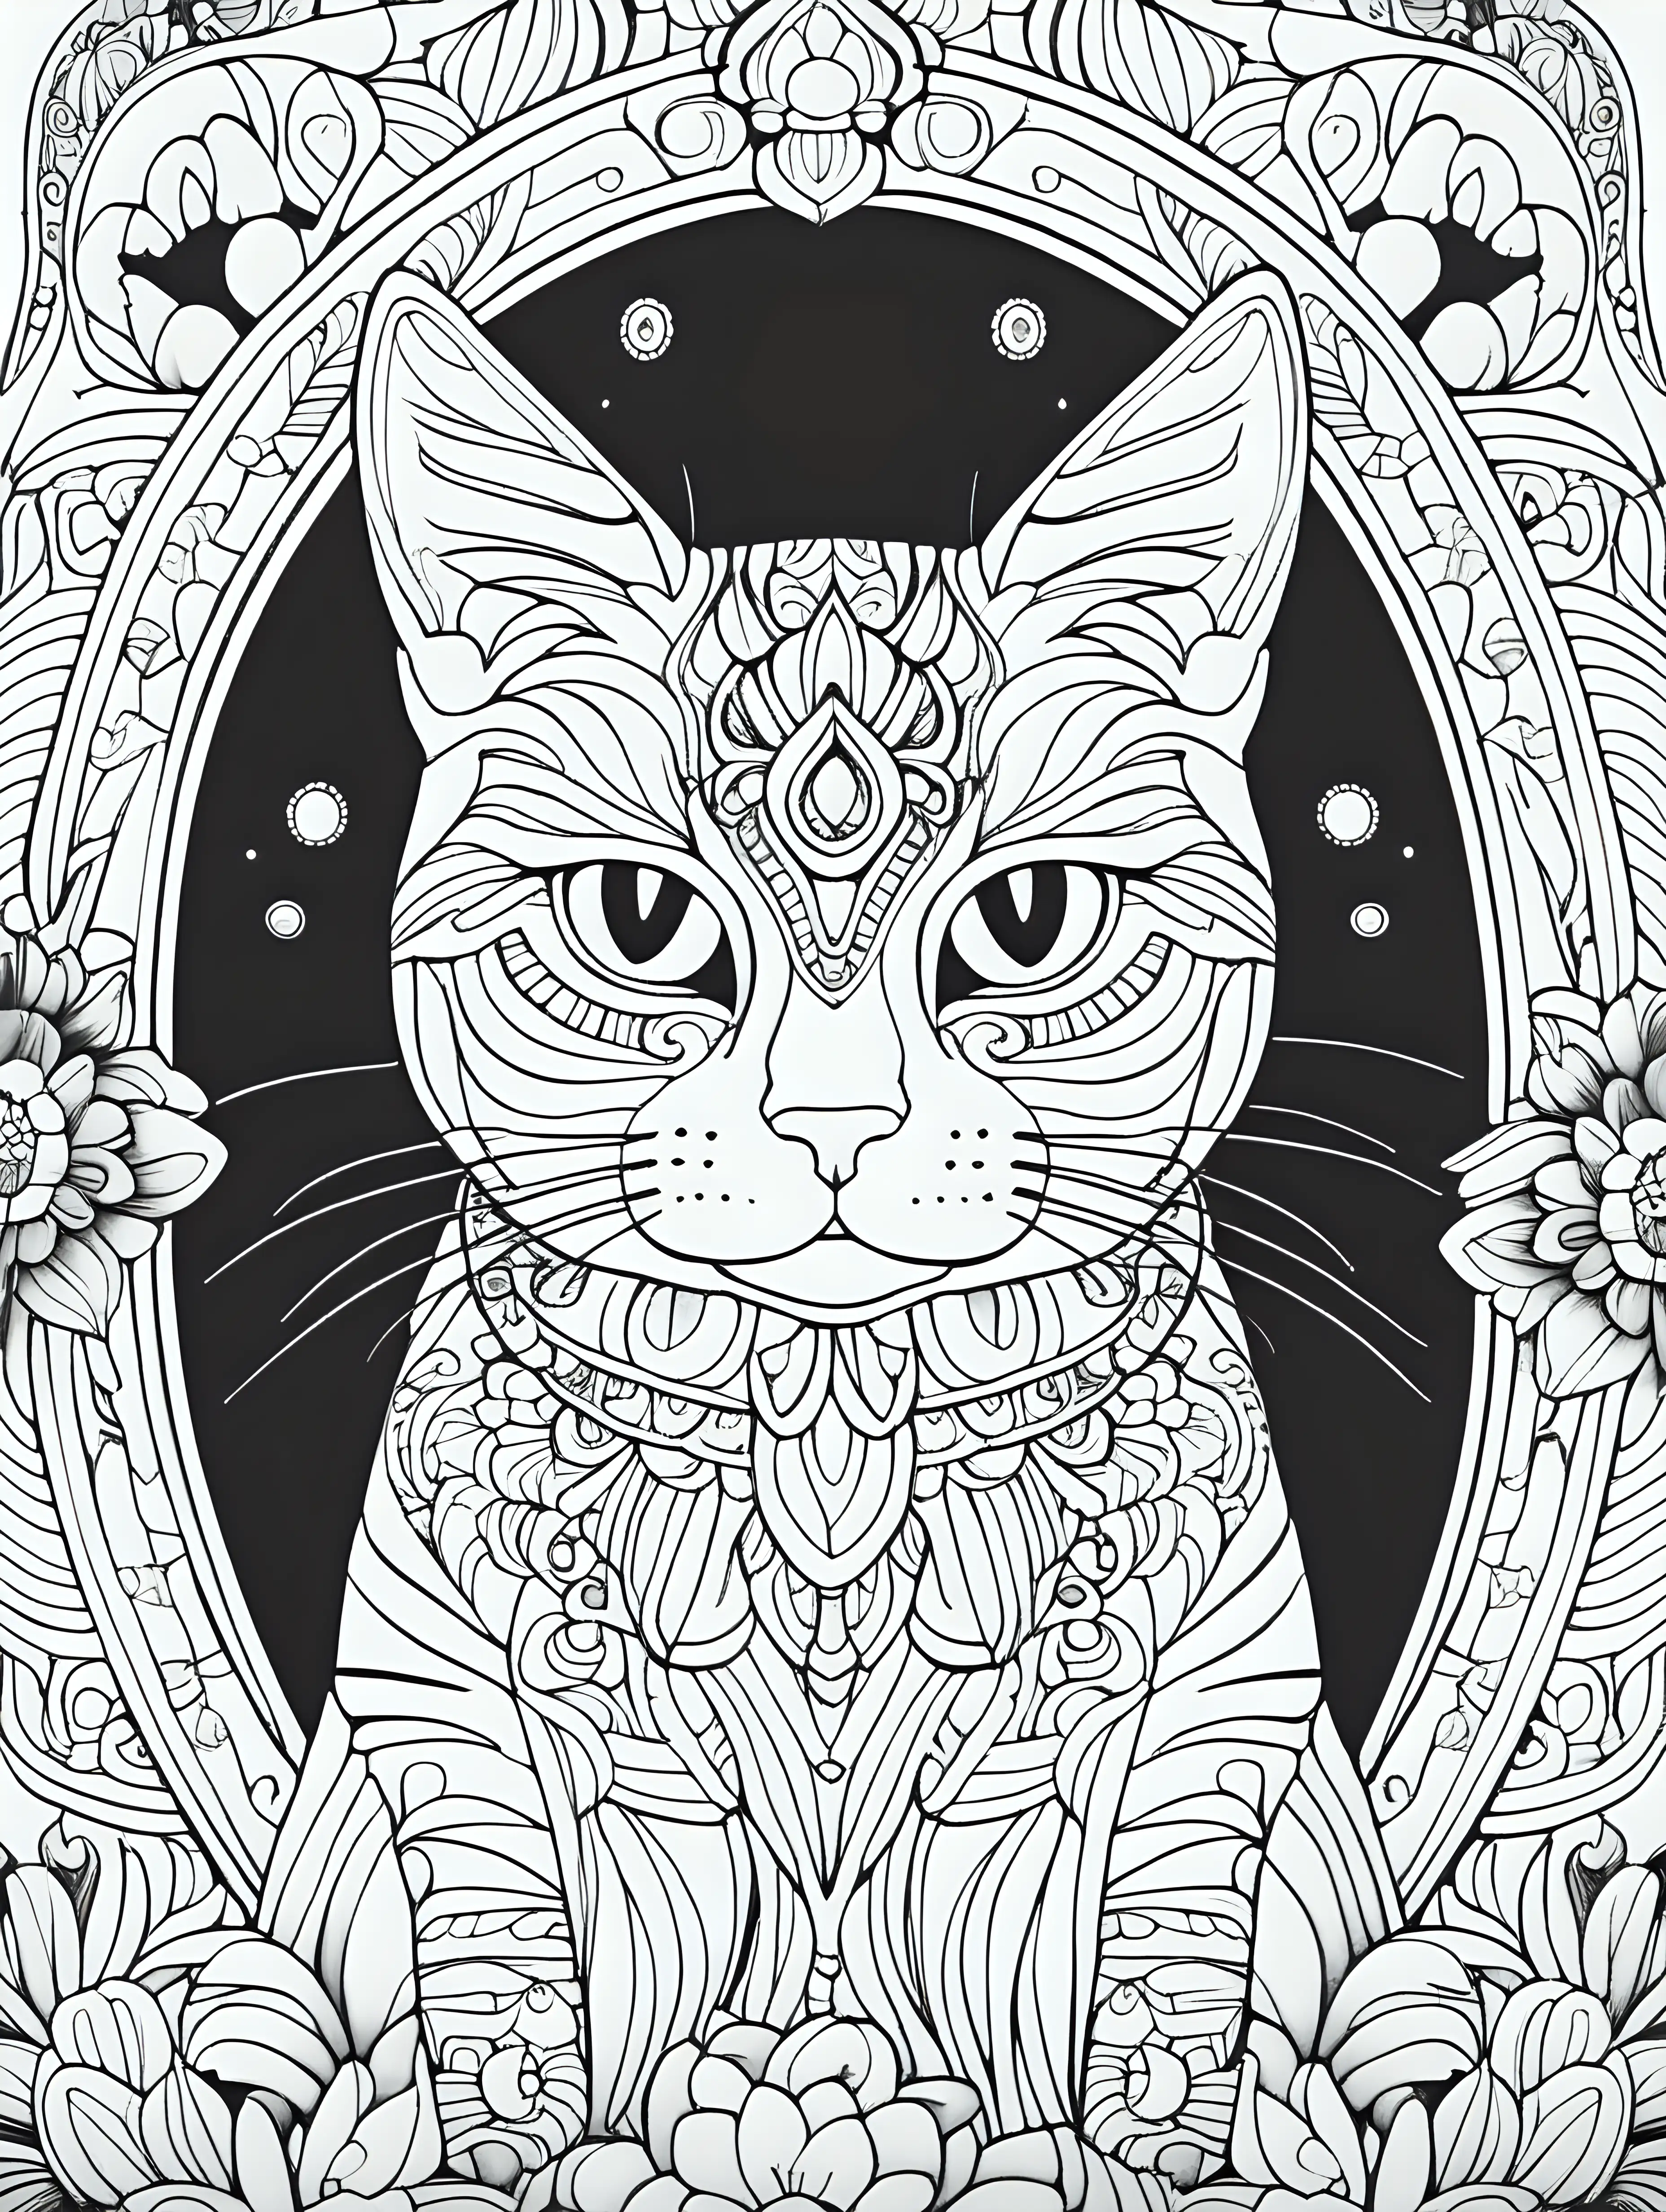 Cat Mandala Coloring Book Intricate Feline Patterns for Relaxation and Creativity